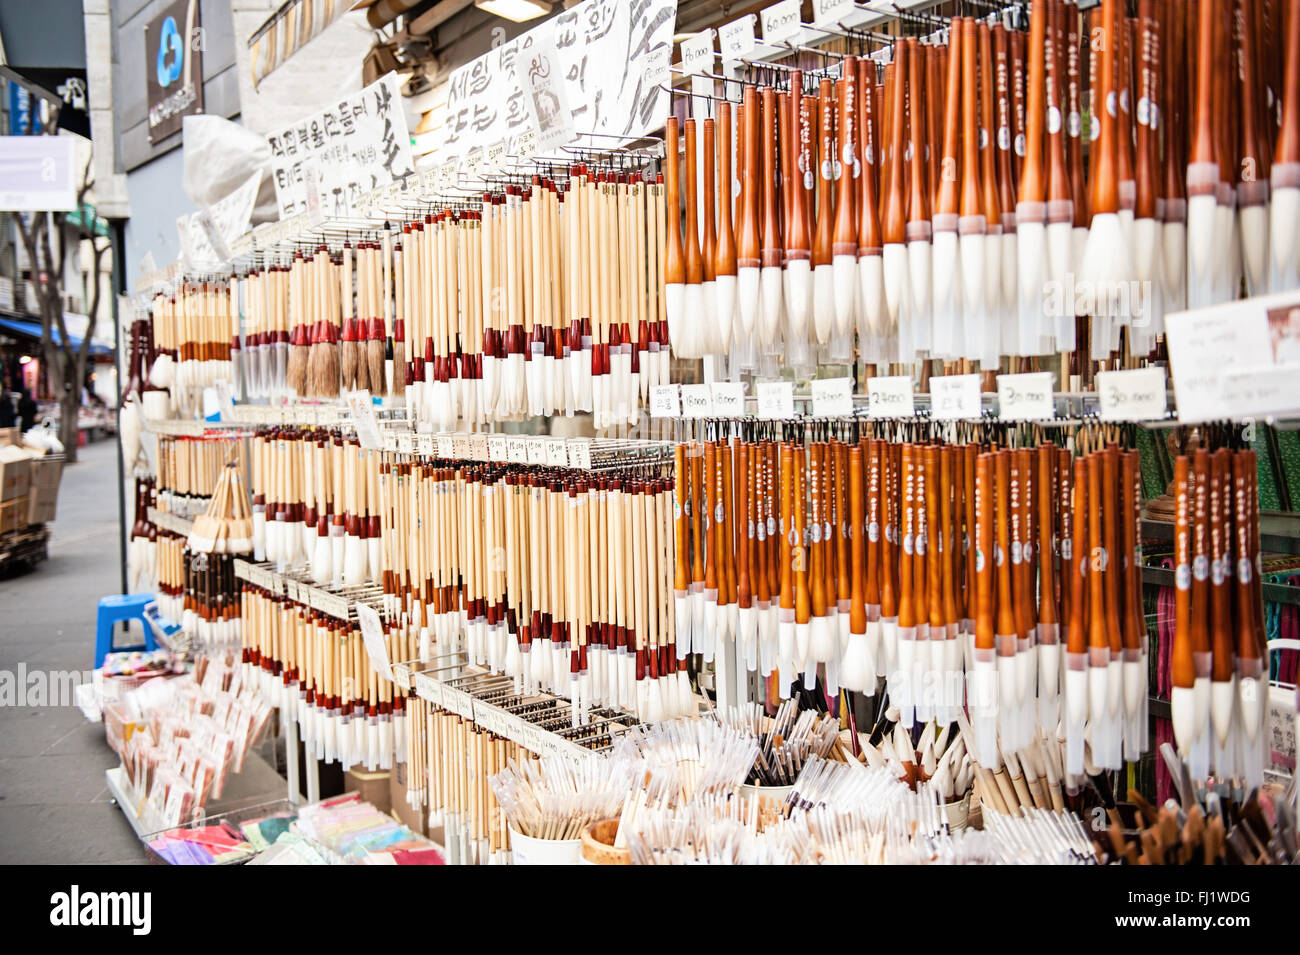 Brushes for sale in Insadong, Seoul, South Korea Stock Photo